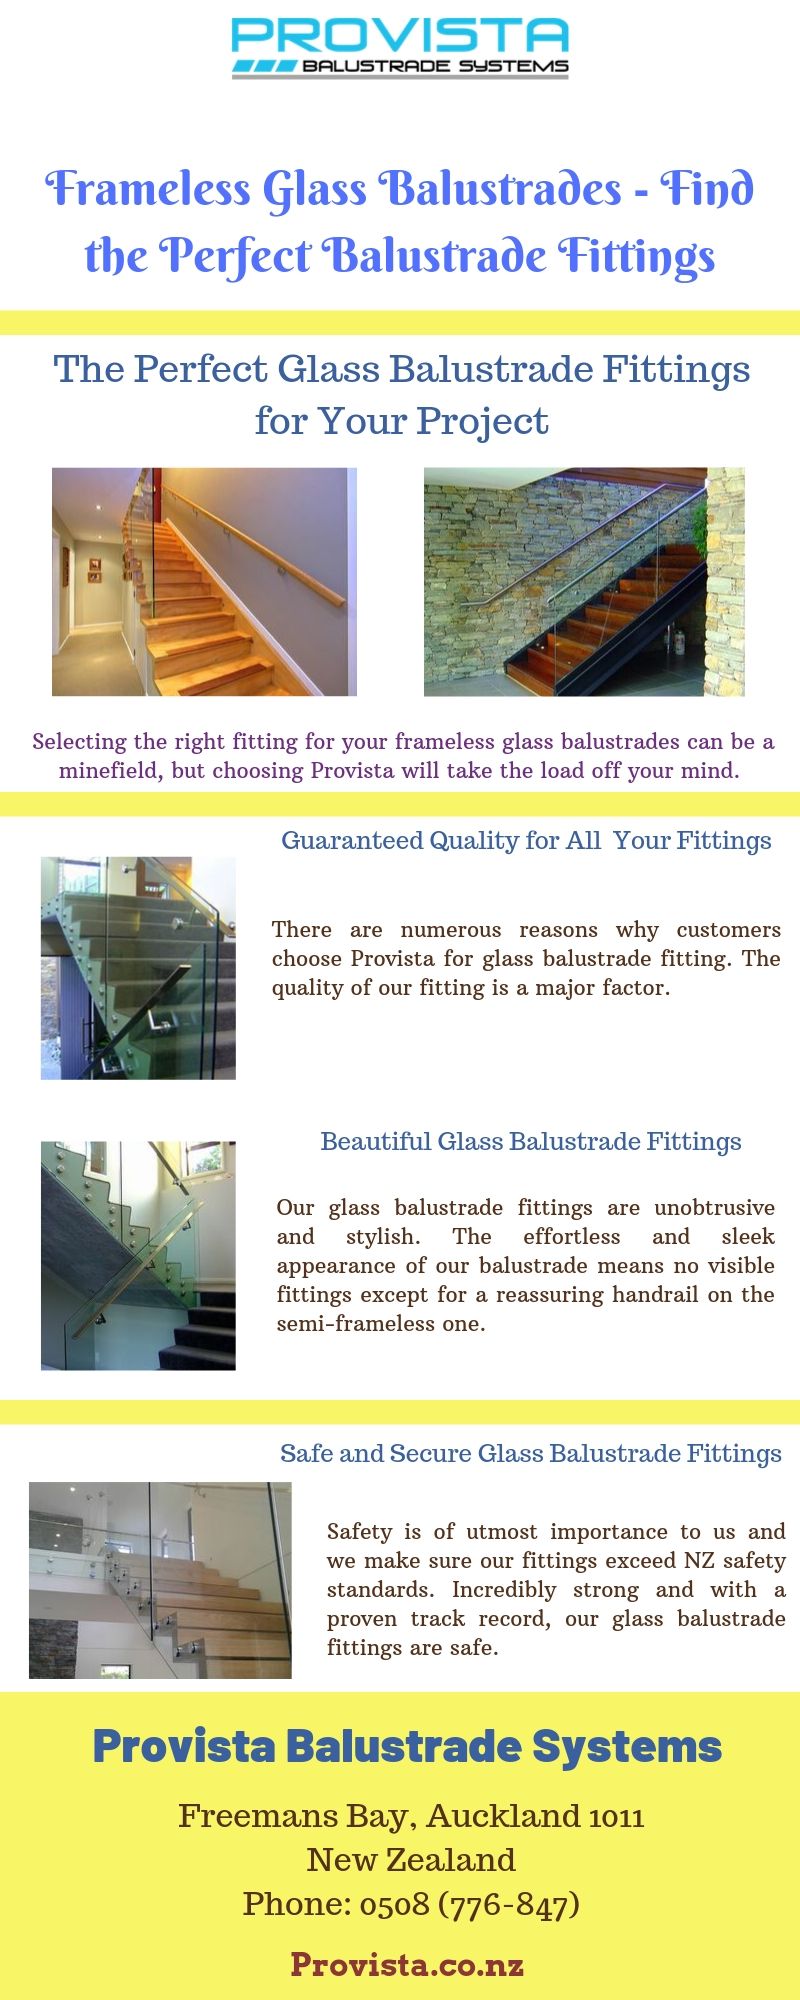 Frameless Glass Balustrades - Find the Perfect Balustrade Fittings There was a time when people fit their own glass balustrades. But times have changed for the better!  For more details, visit this link: https://bit.ly/2kOKNGy
 by Provista